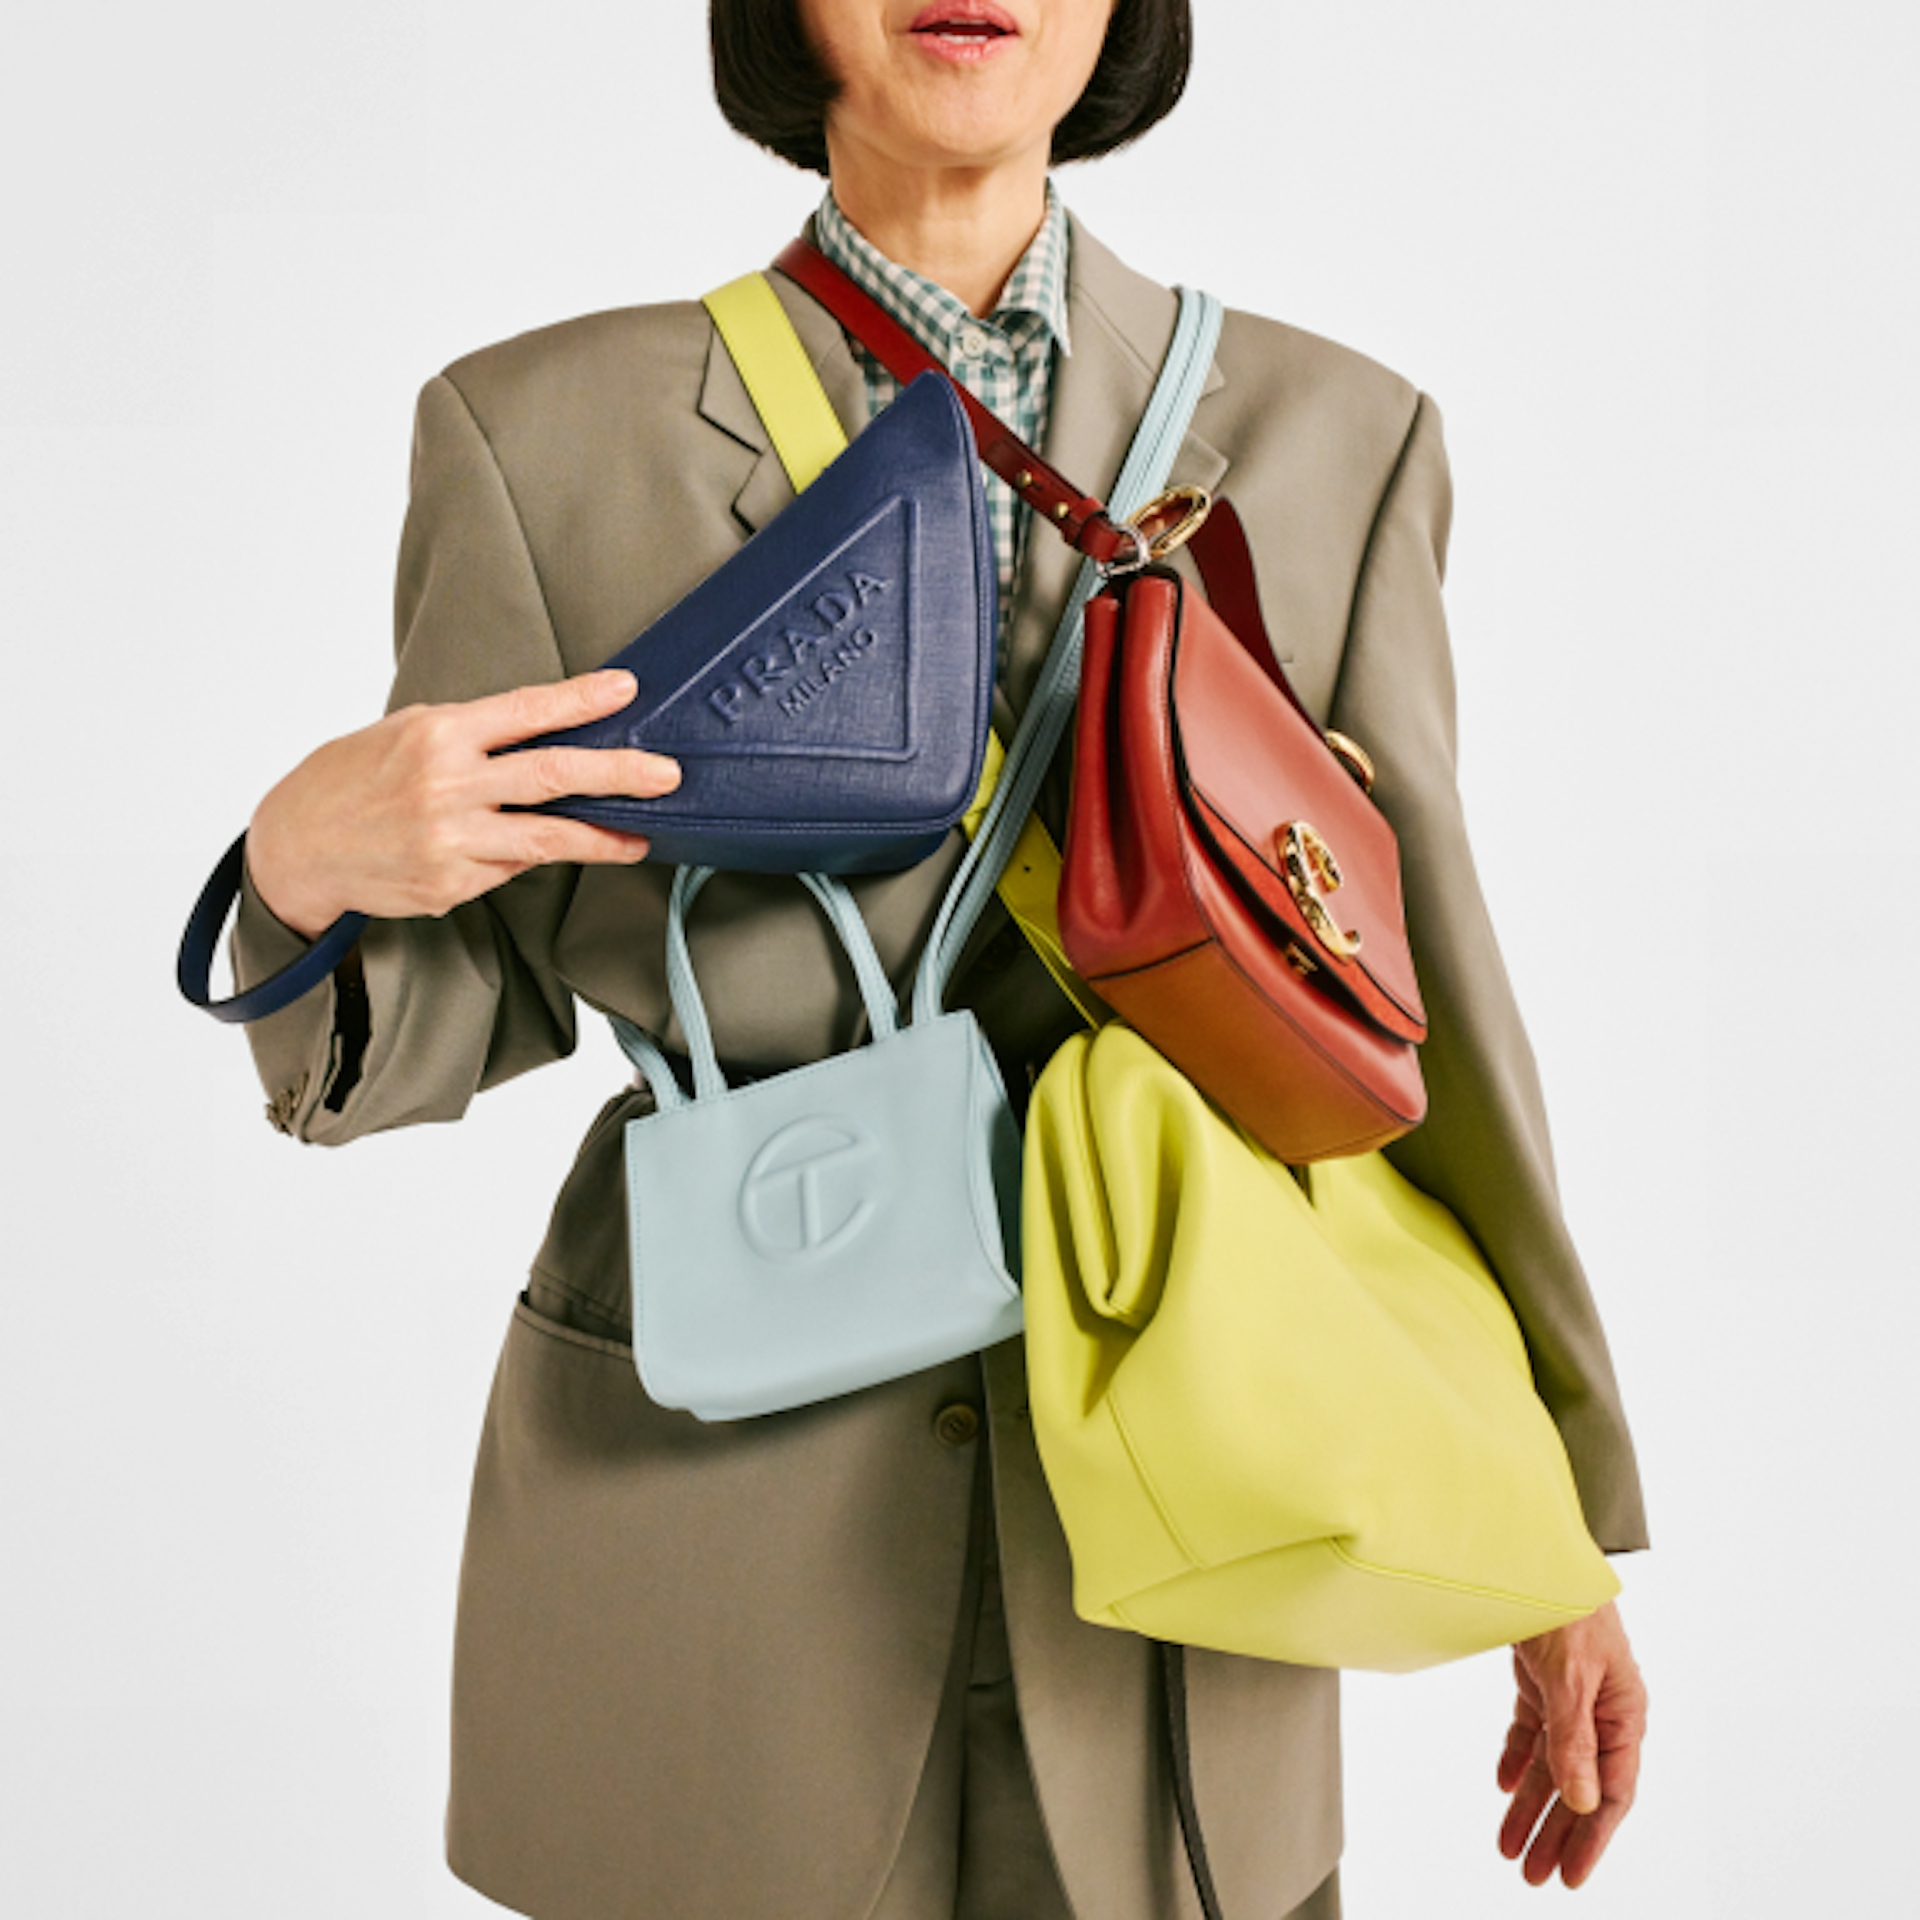 A person dressed in a beige suit is holding multiple handbags of various colors and styles, including a blue Prada bag, a light blue Telfar bag, a red handbag, and a yellow bag. The image highlights the variety and fashion-forward nature of the bags.